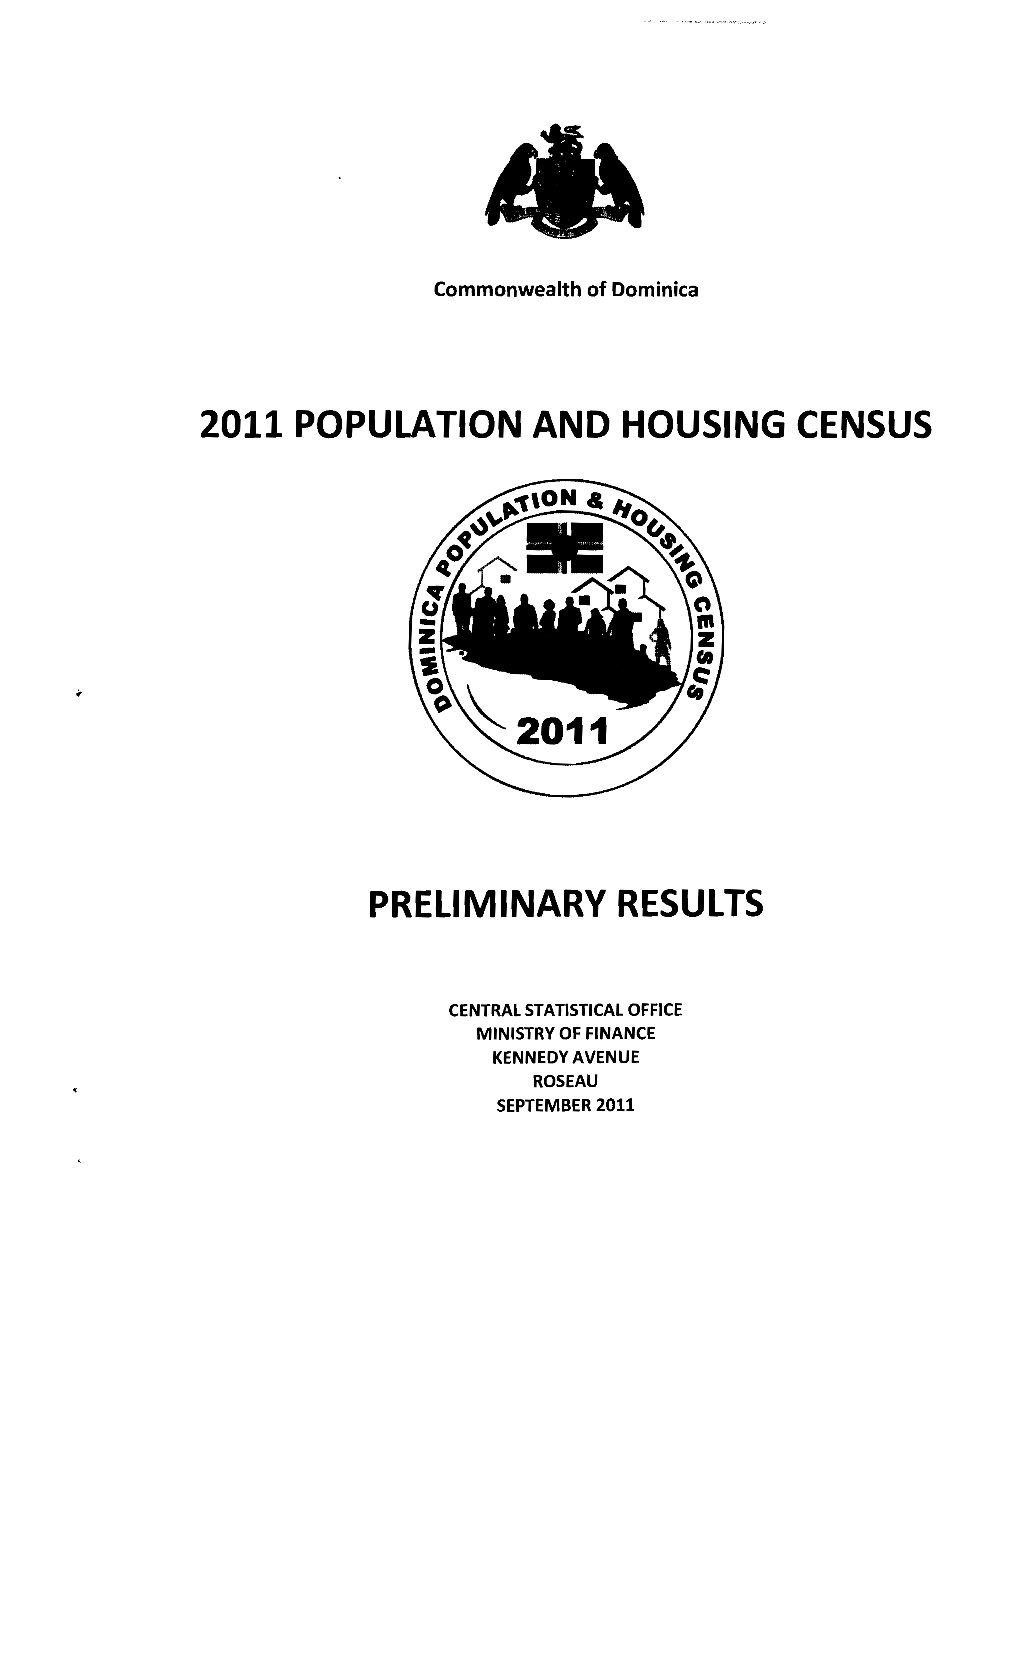 Population and Housing Census 2011 (Preliminary Results)